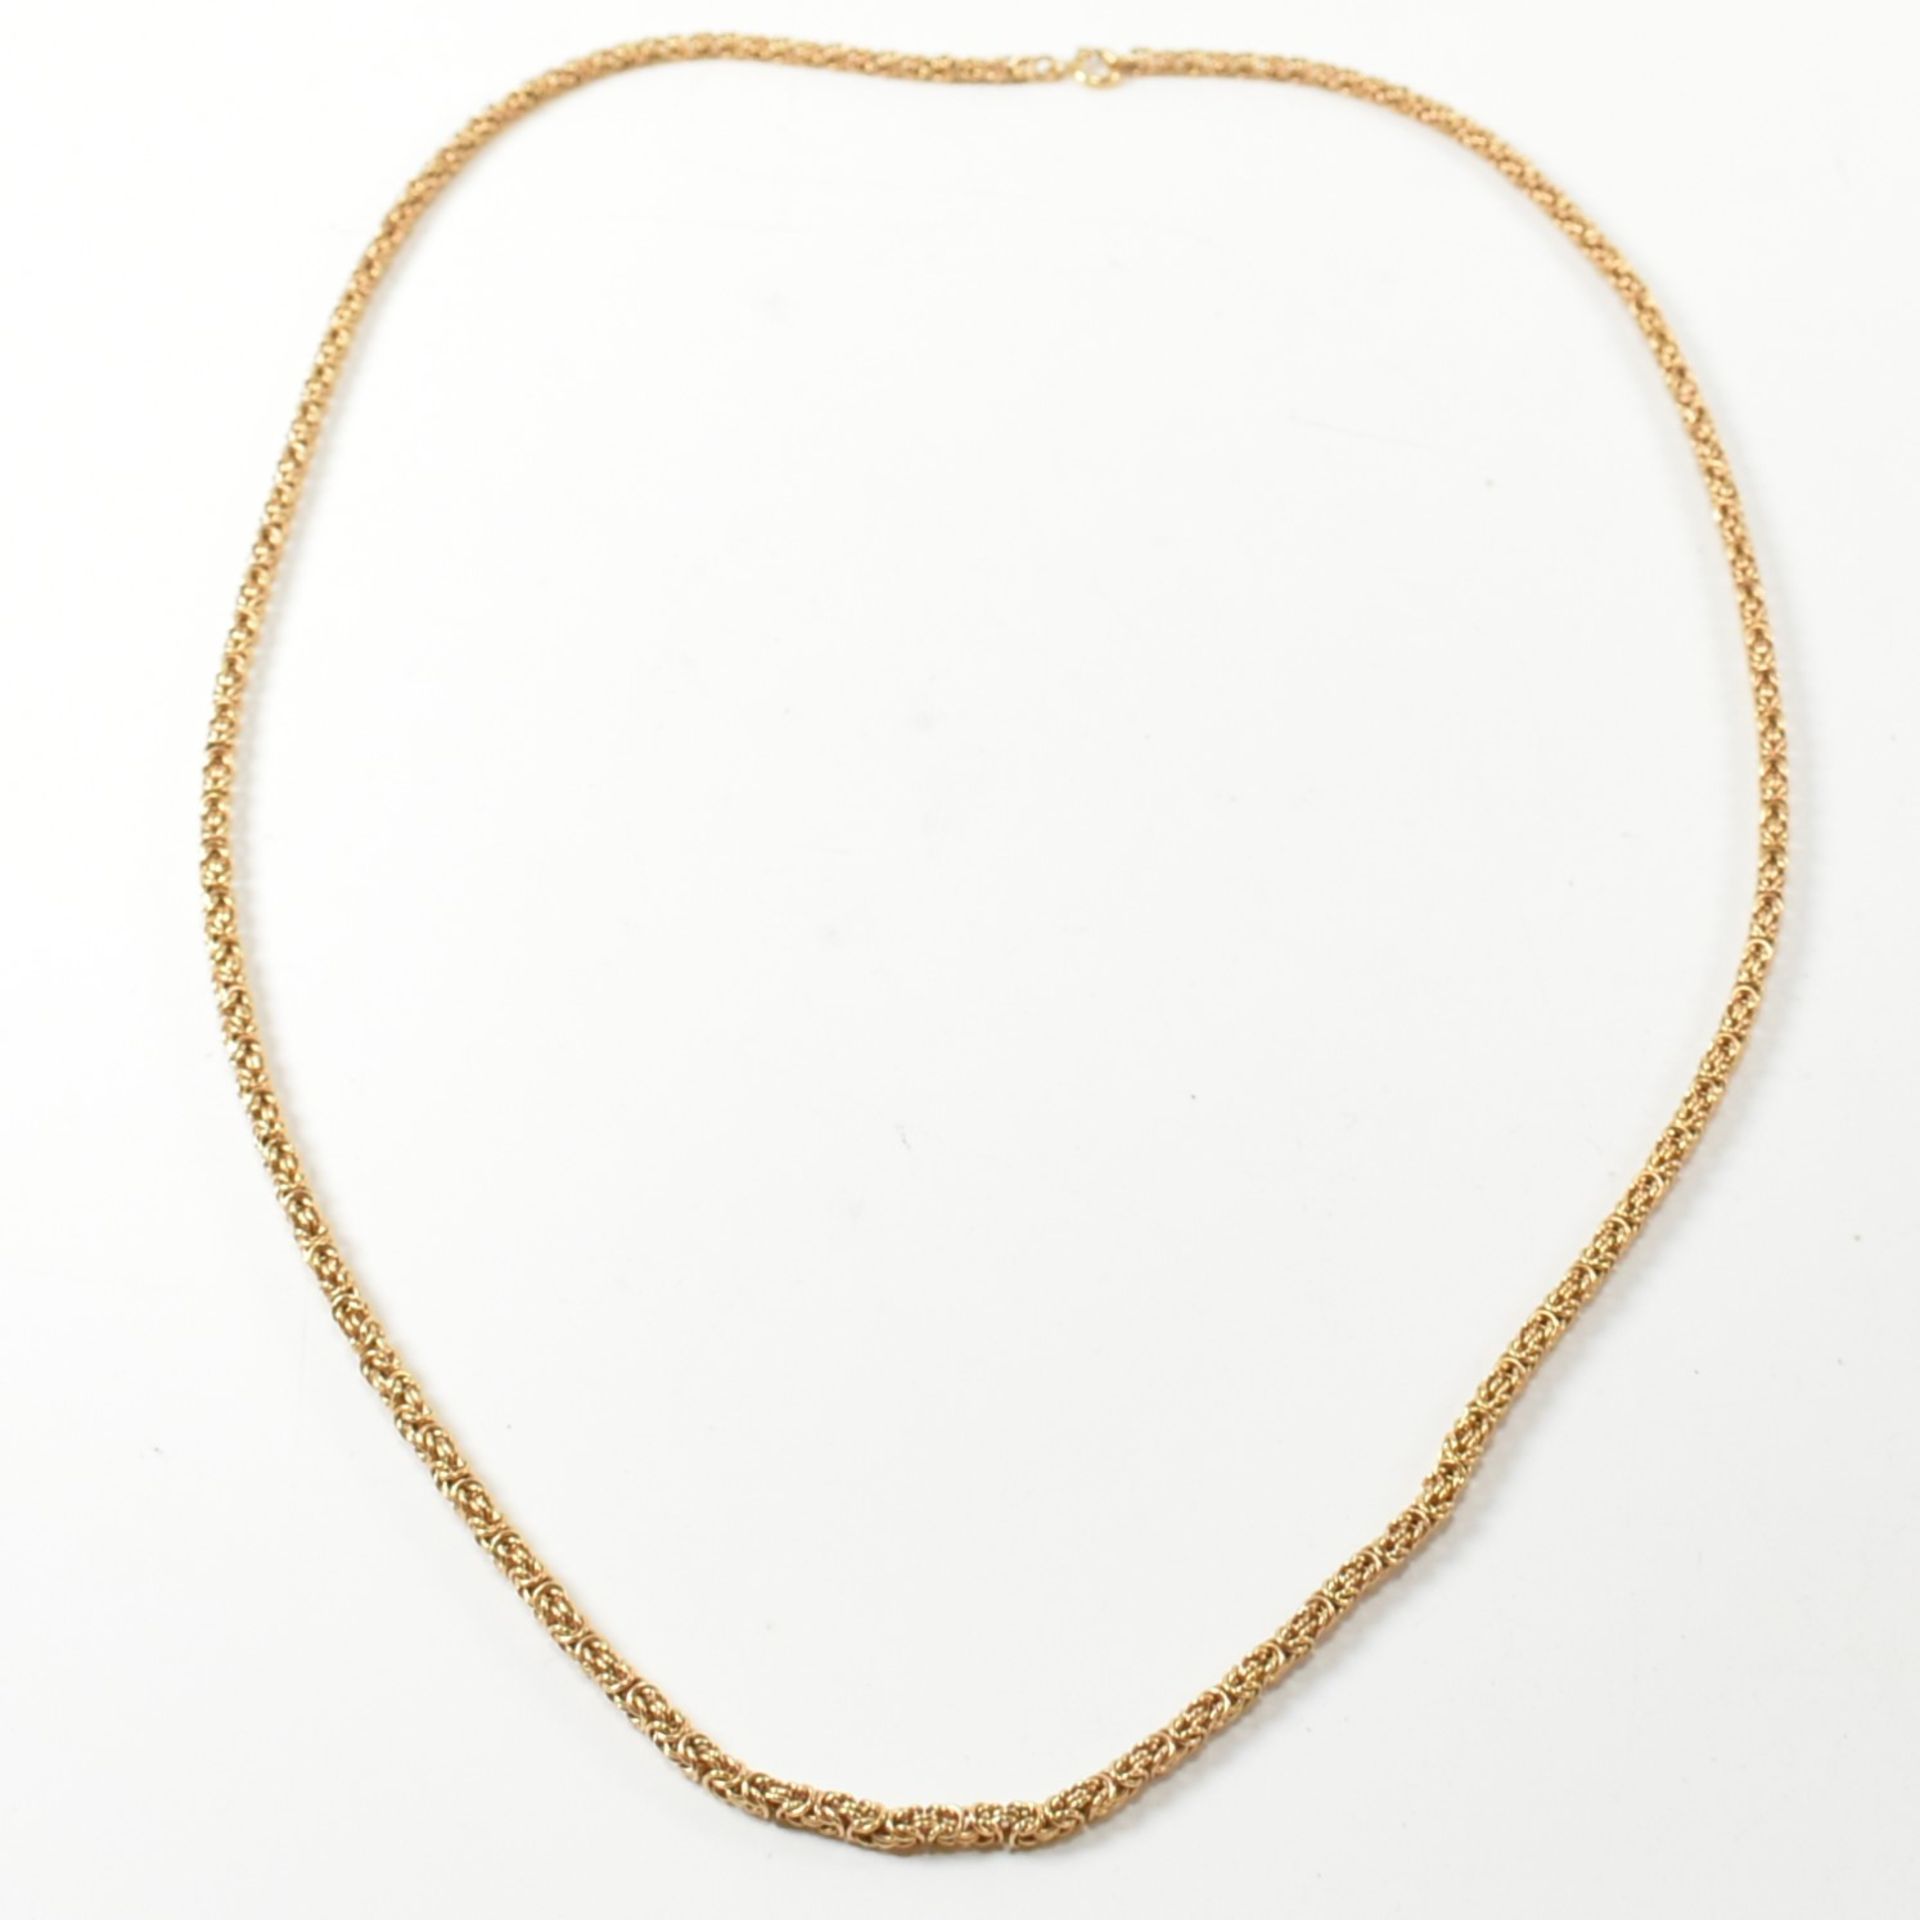 PORTUGUESE 19.2CT GOLD BYZANTINE CHAIN NECKLACE - Image 3 of 4